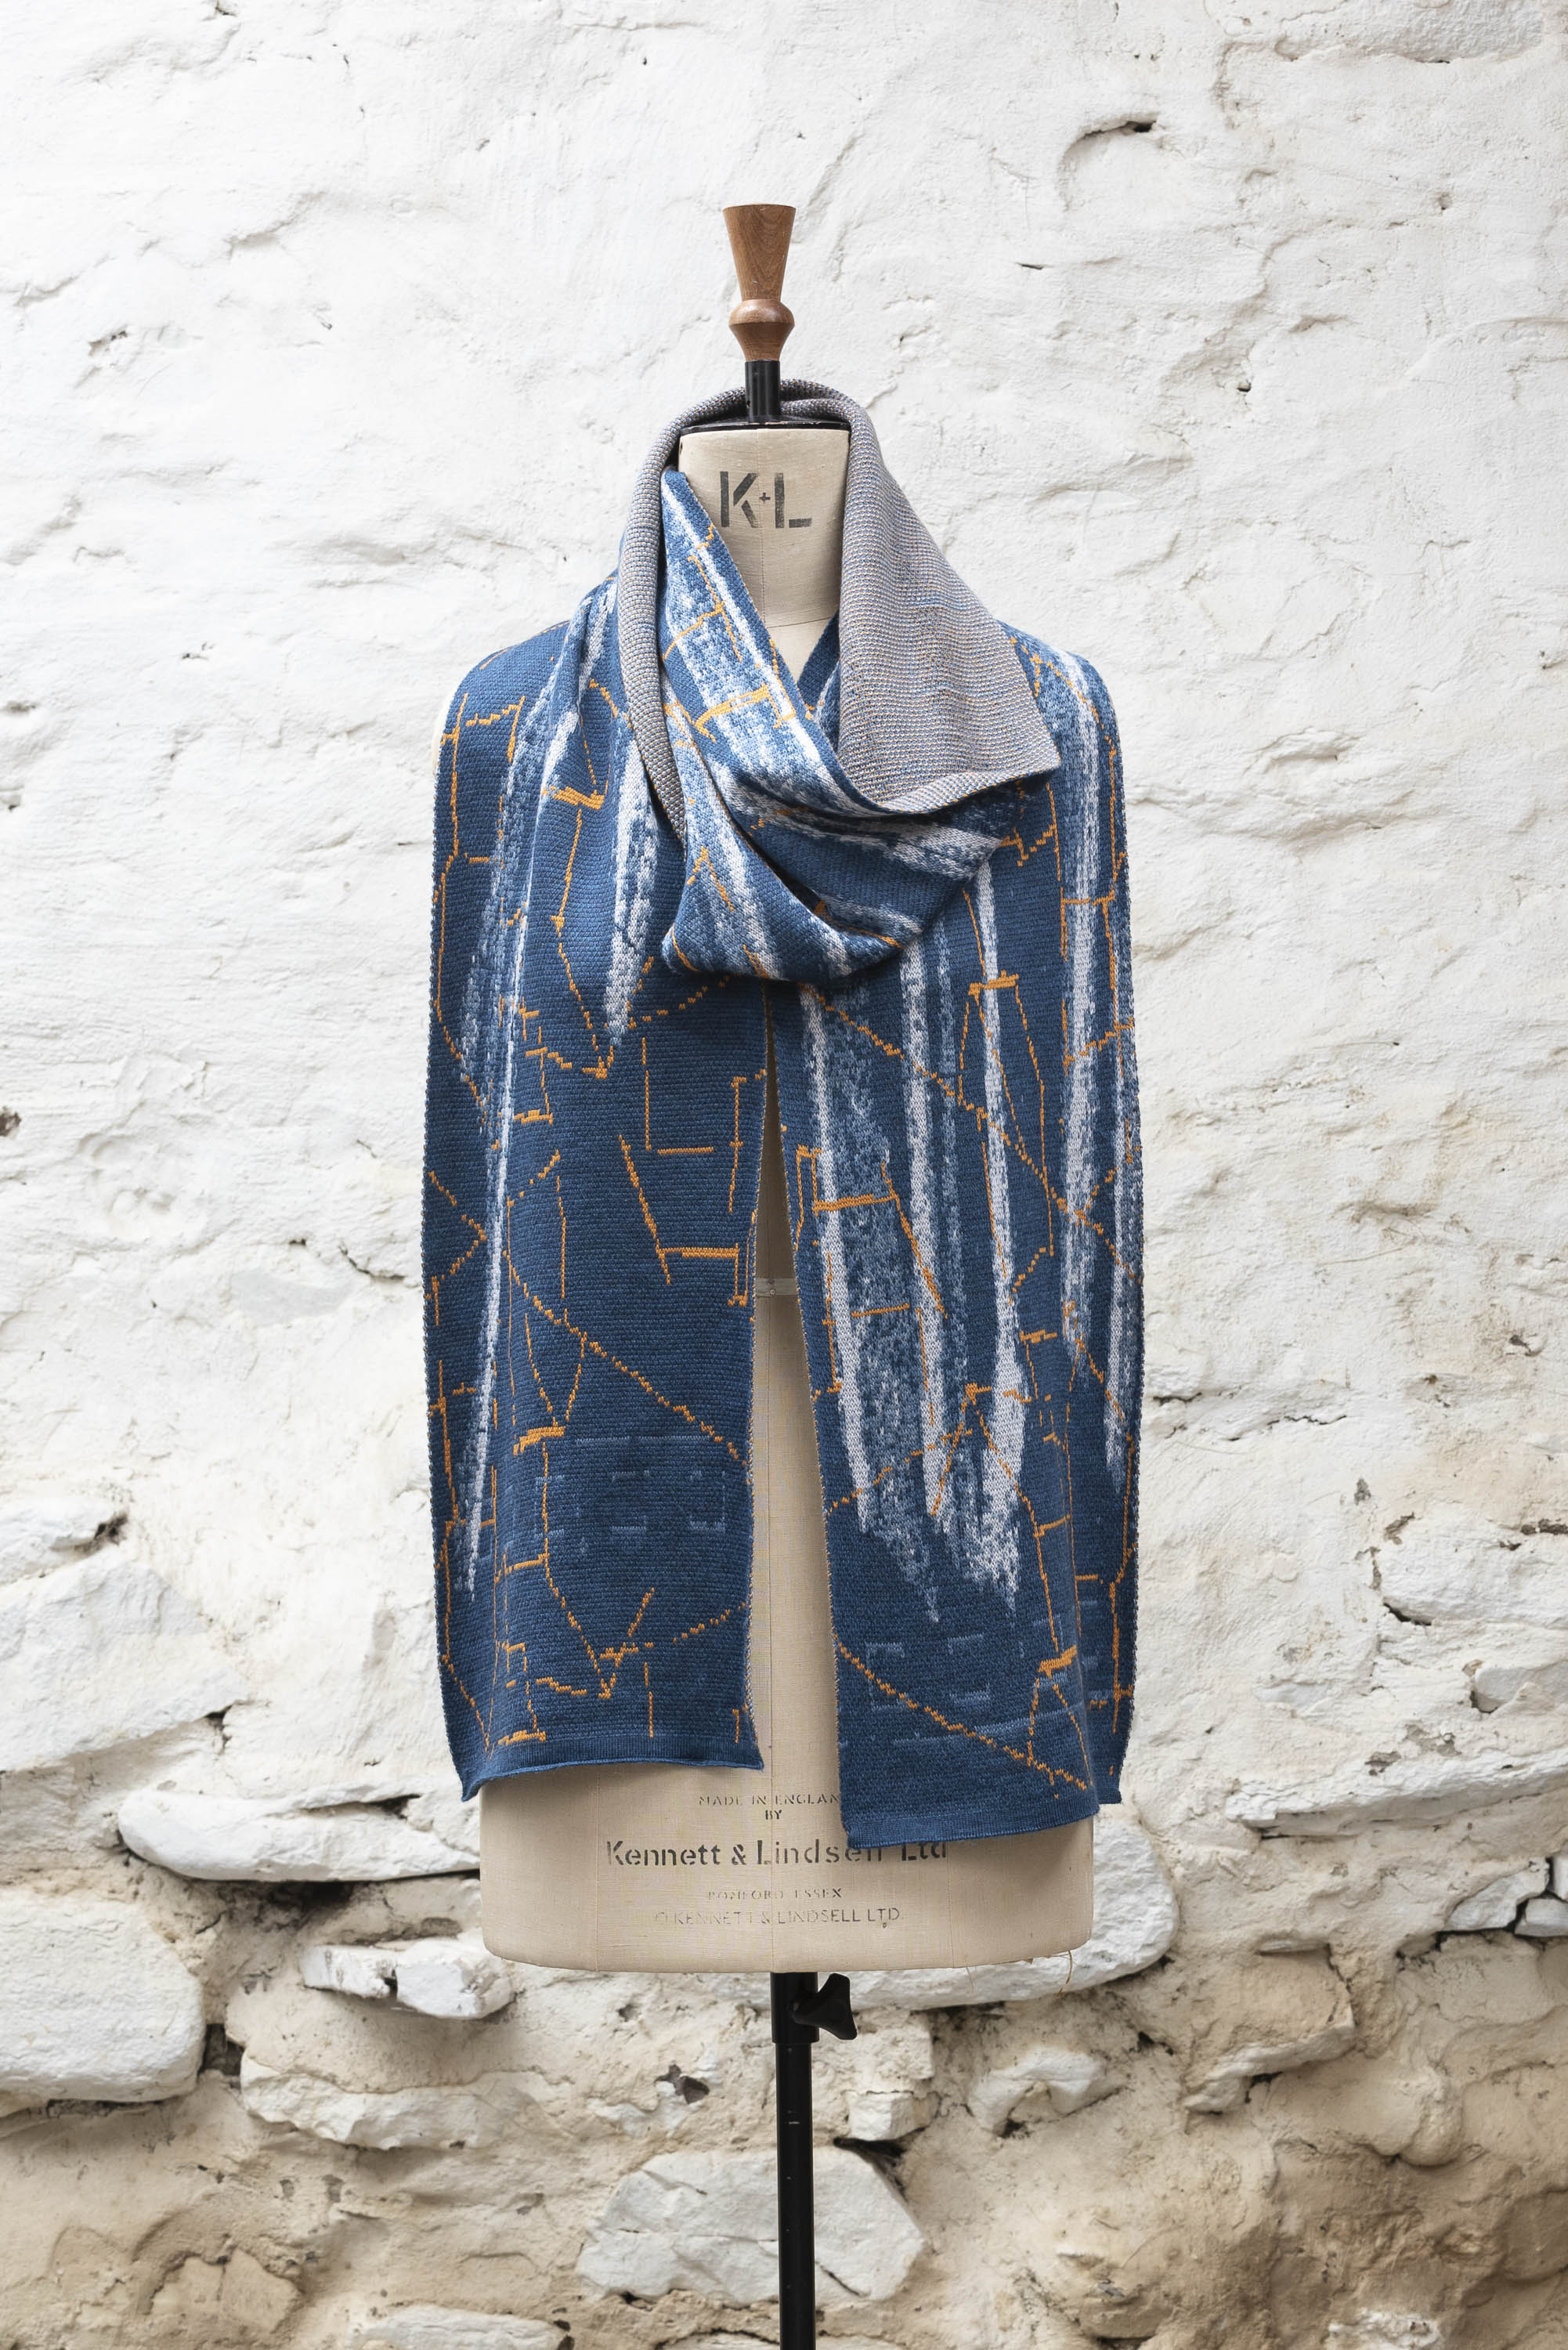 Contemporary Shetland knitted scarf in abstract design of blues and greys with orange highlights